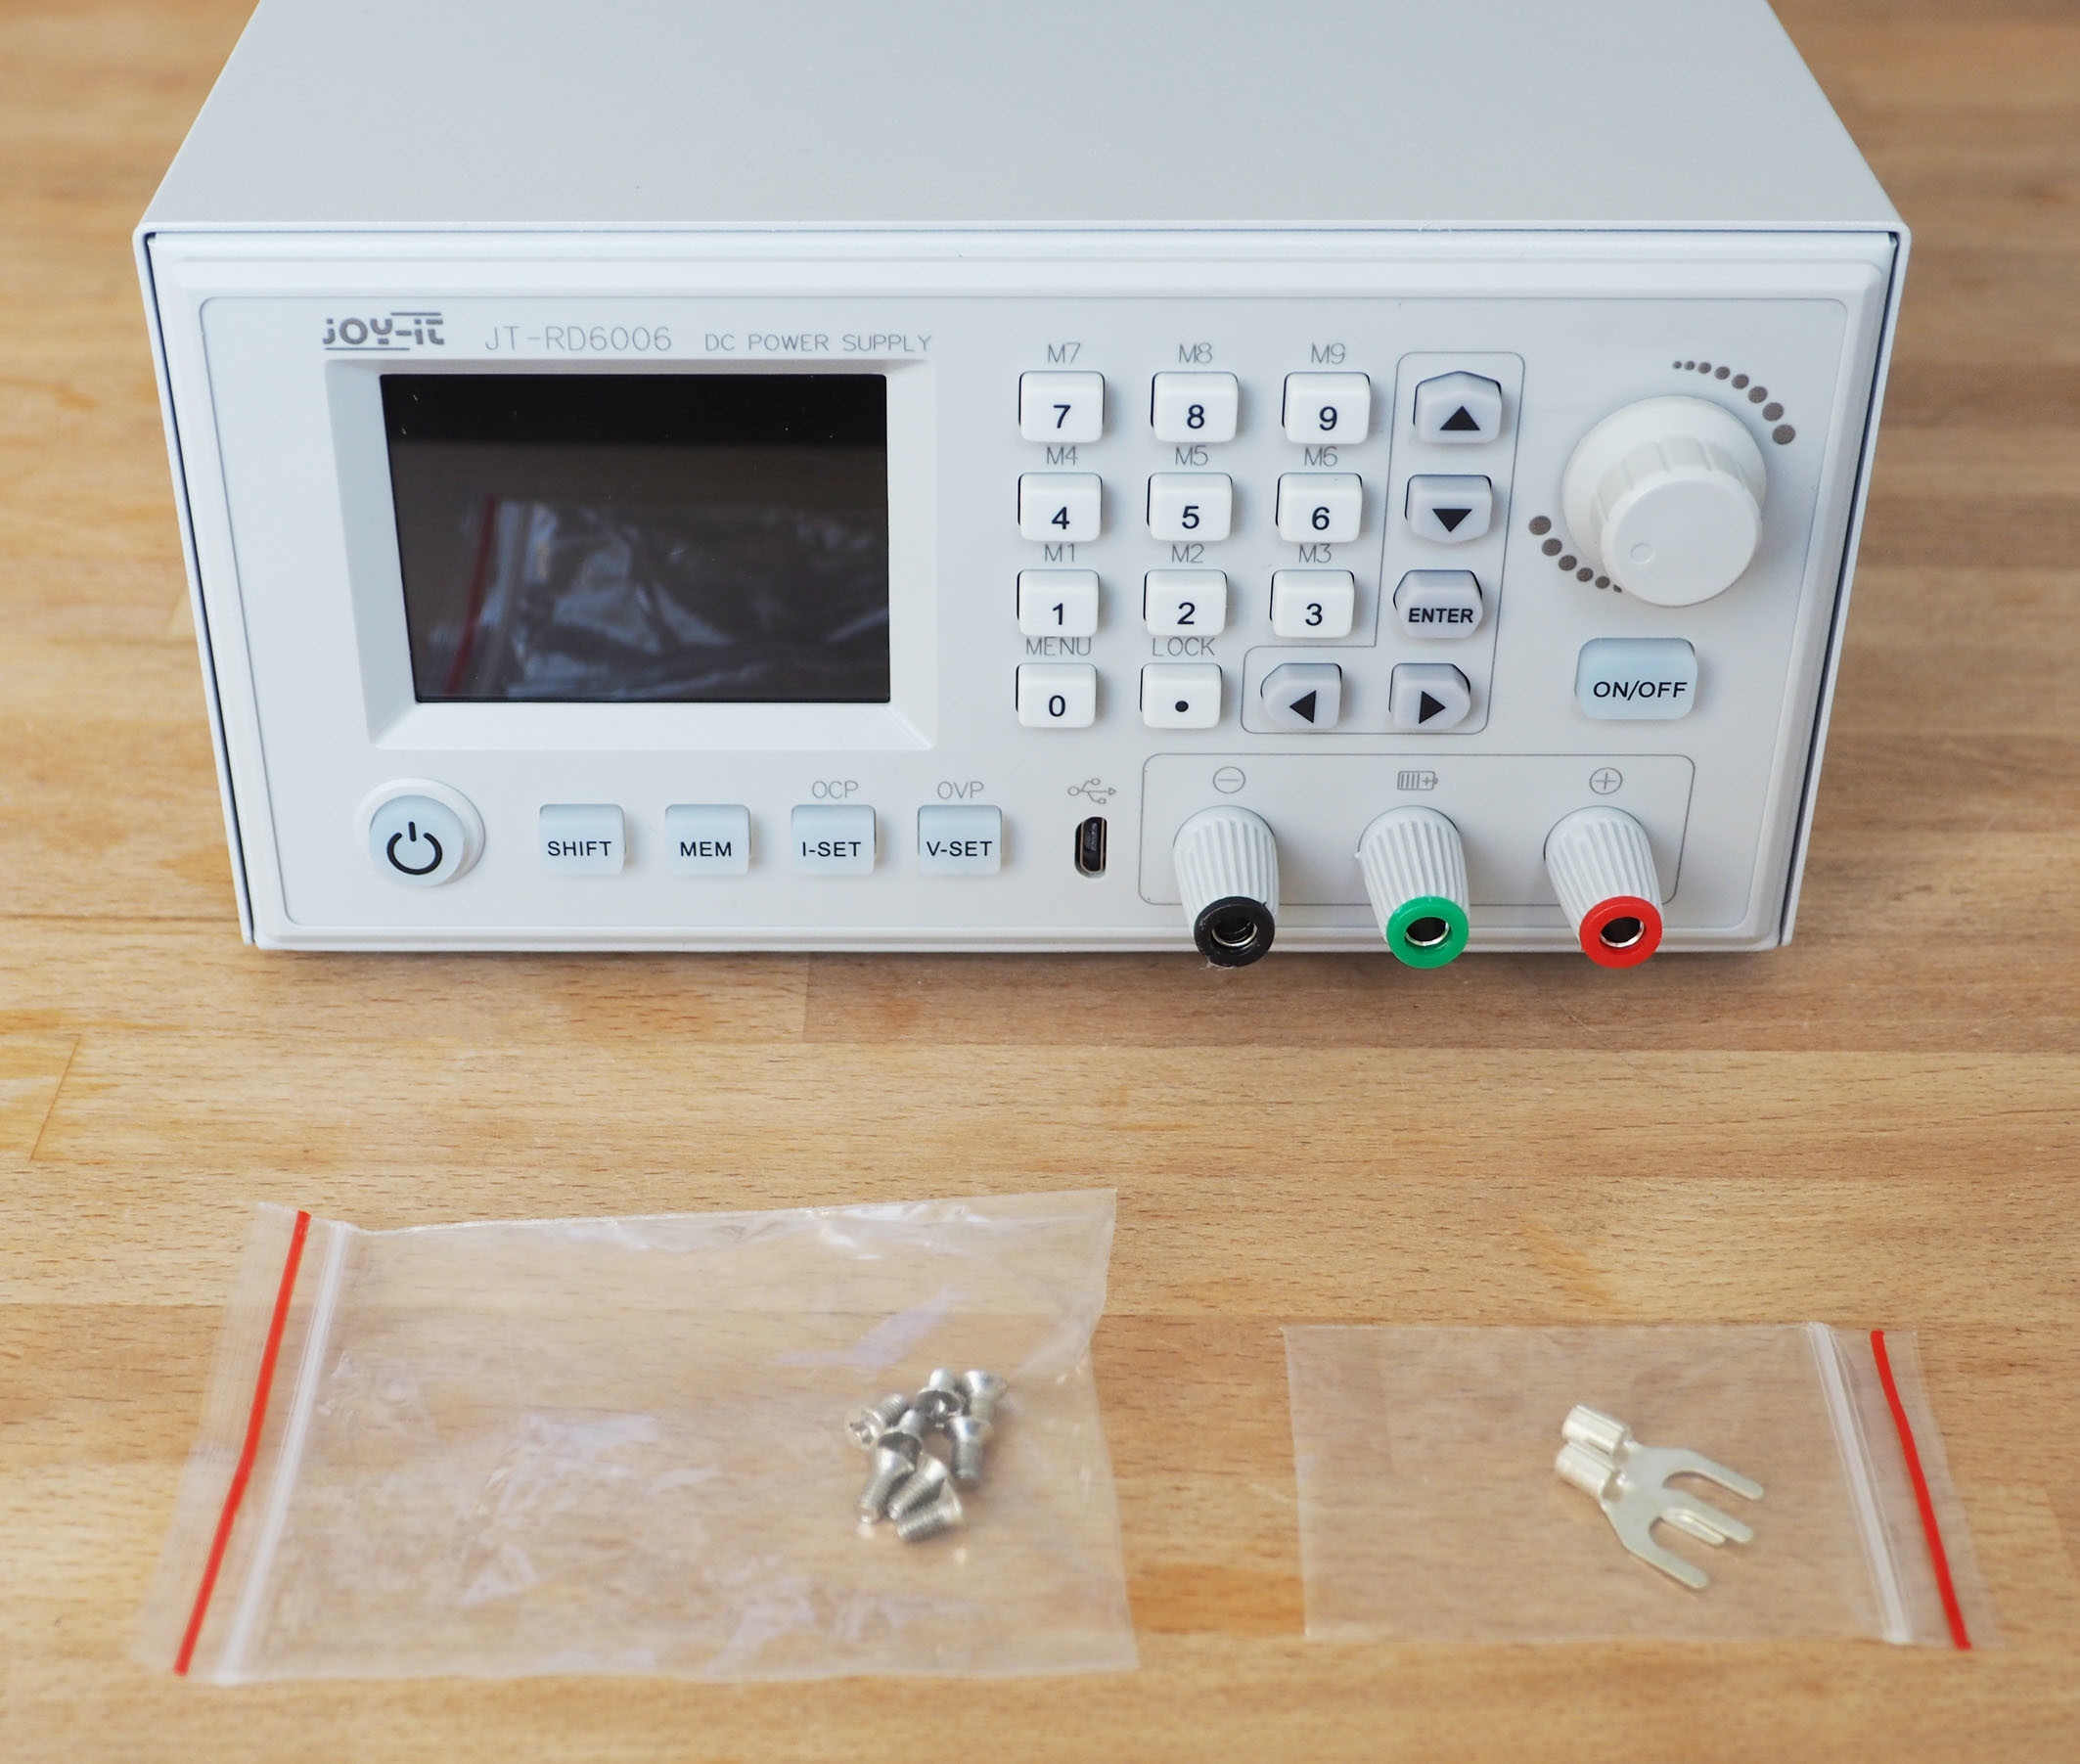 Review: Joy-iT RD6006 Benchtop Power Supply Kit